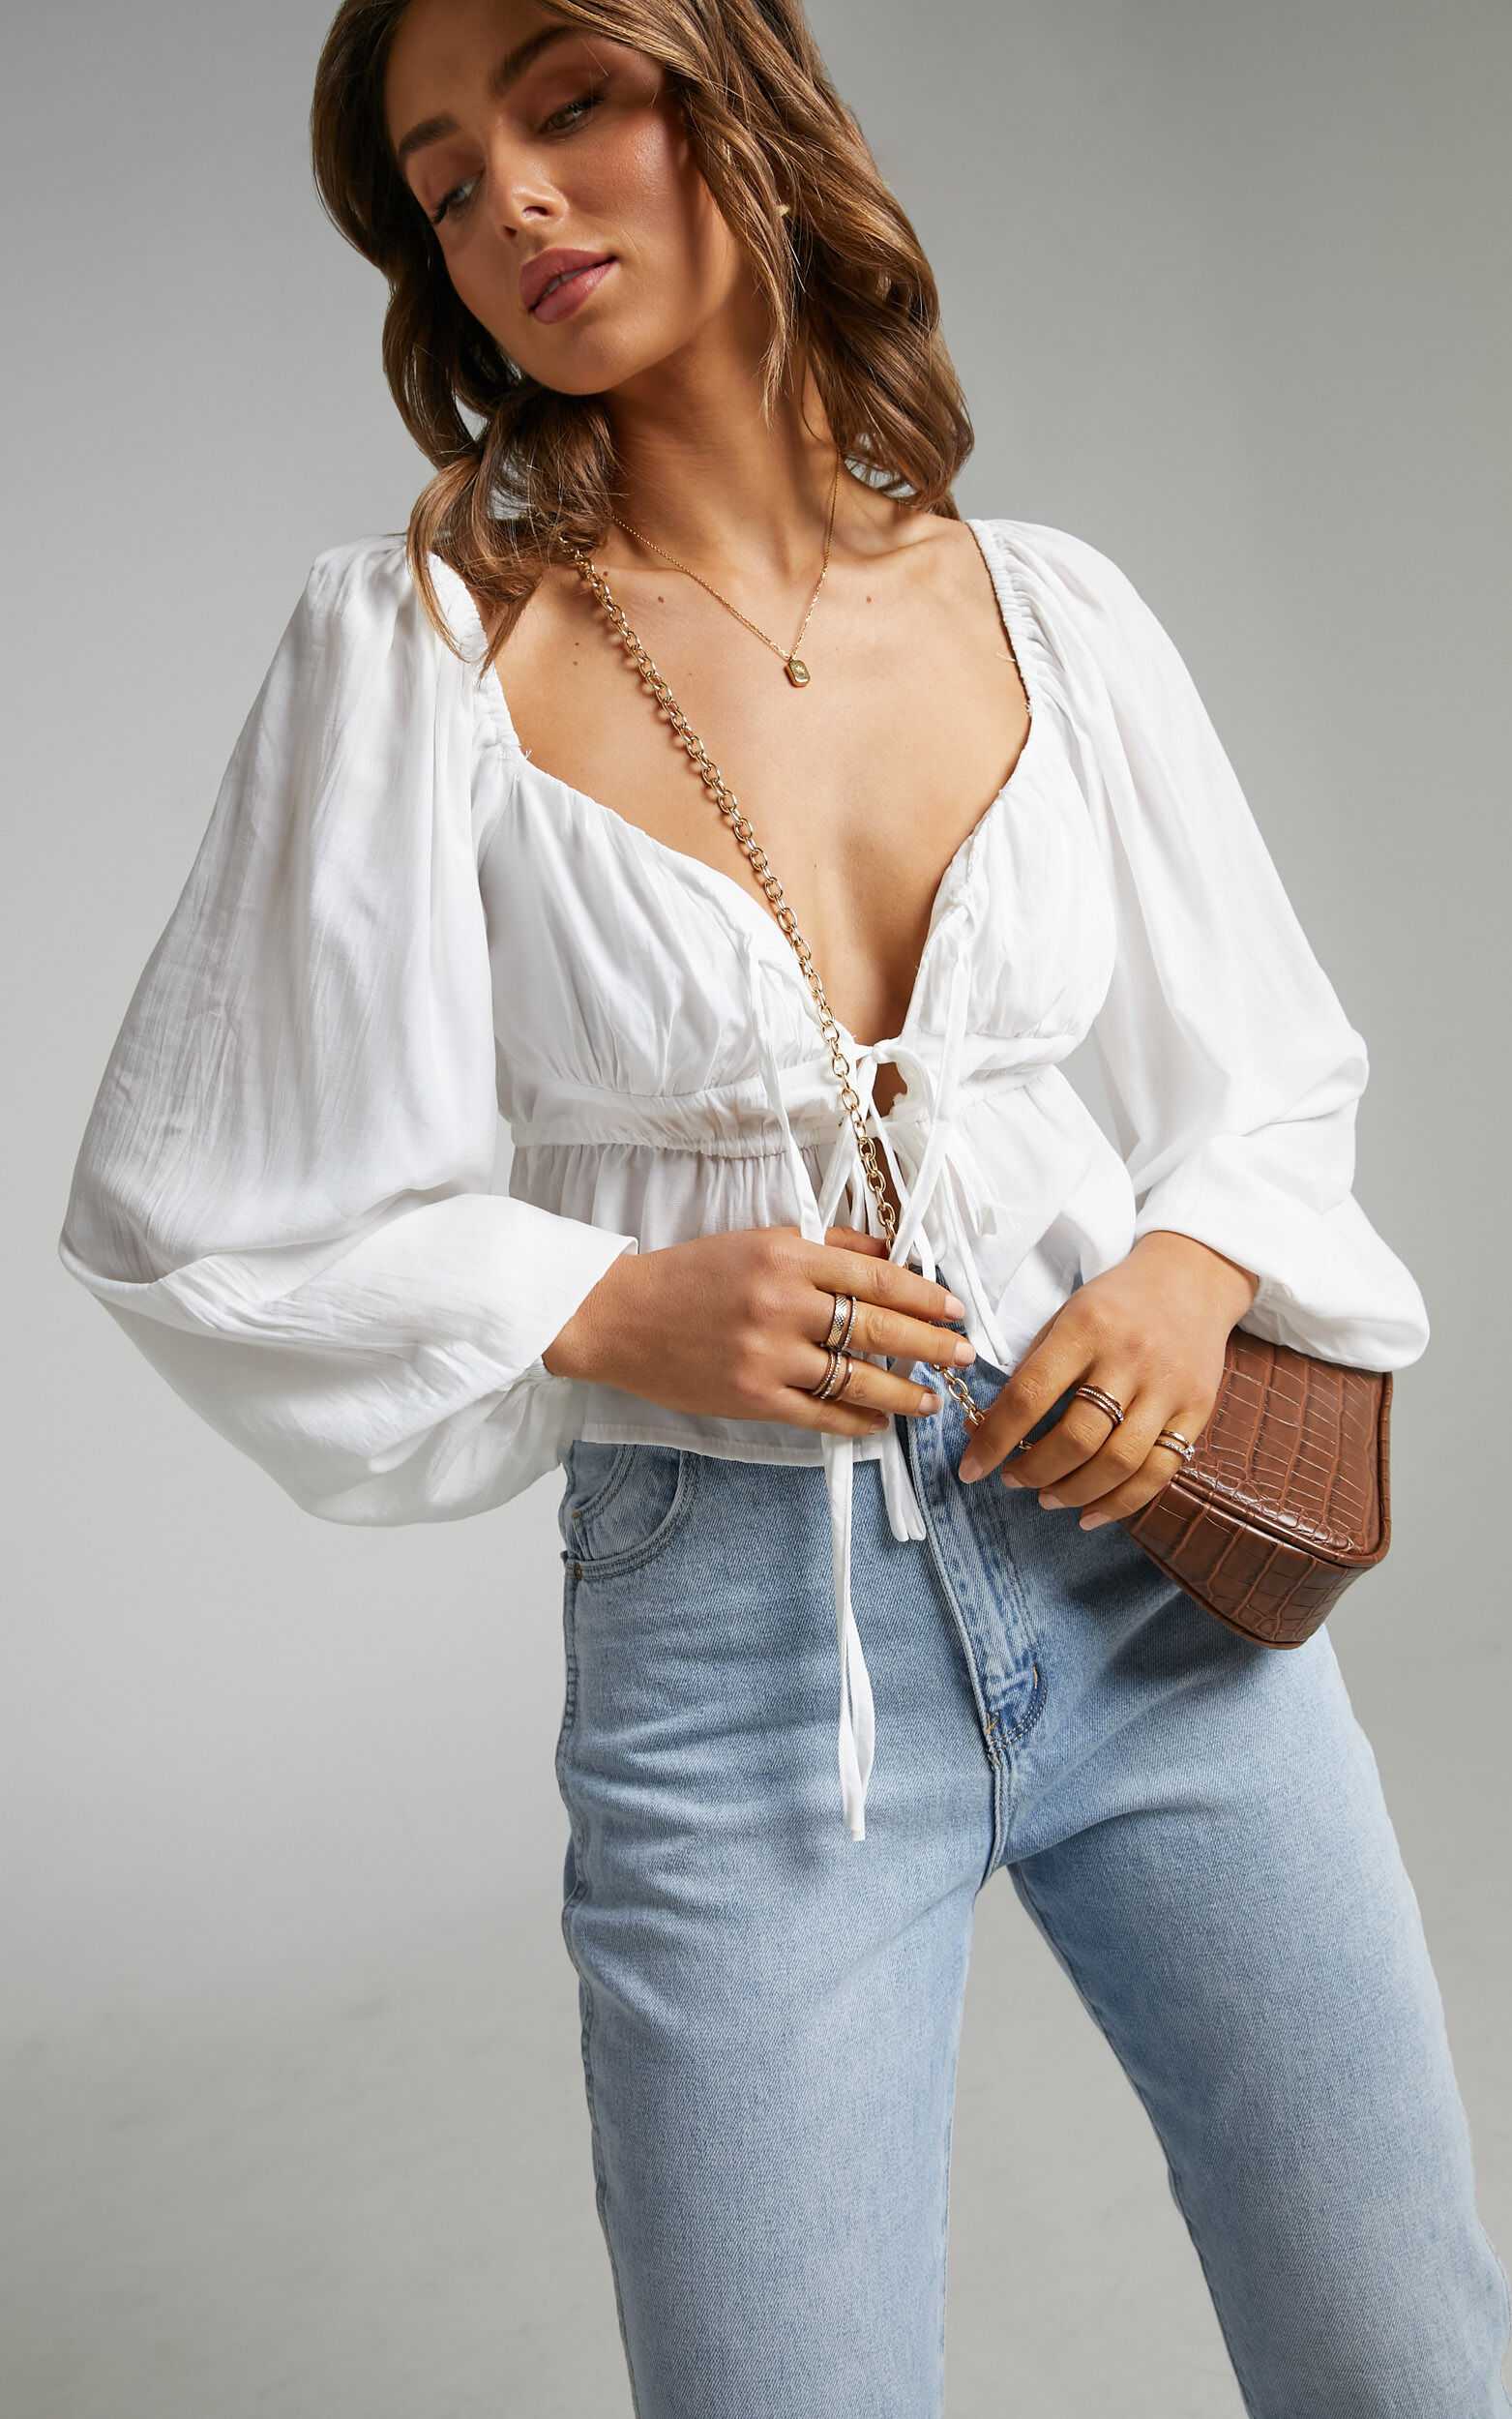 Nadine Top - Long Sleeve Ruched Bust Top in White - 06, WHT5